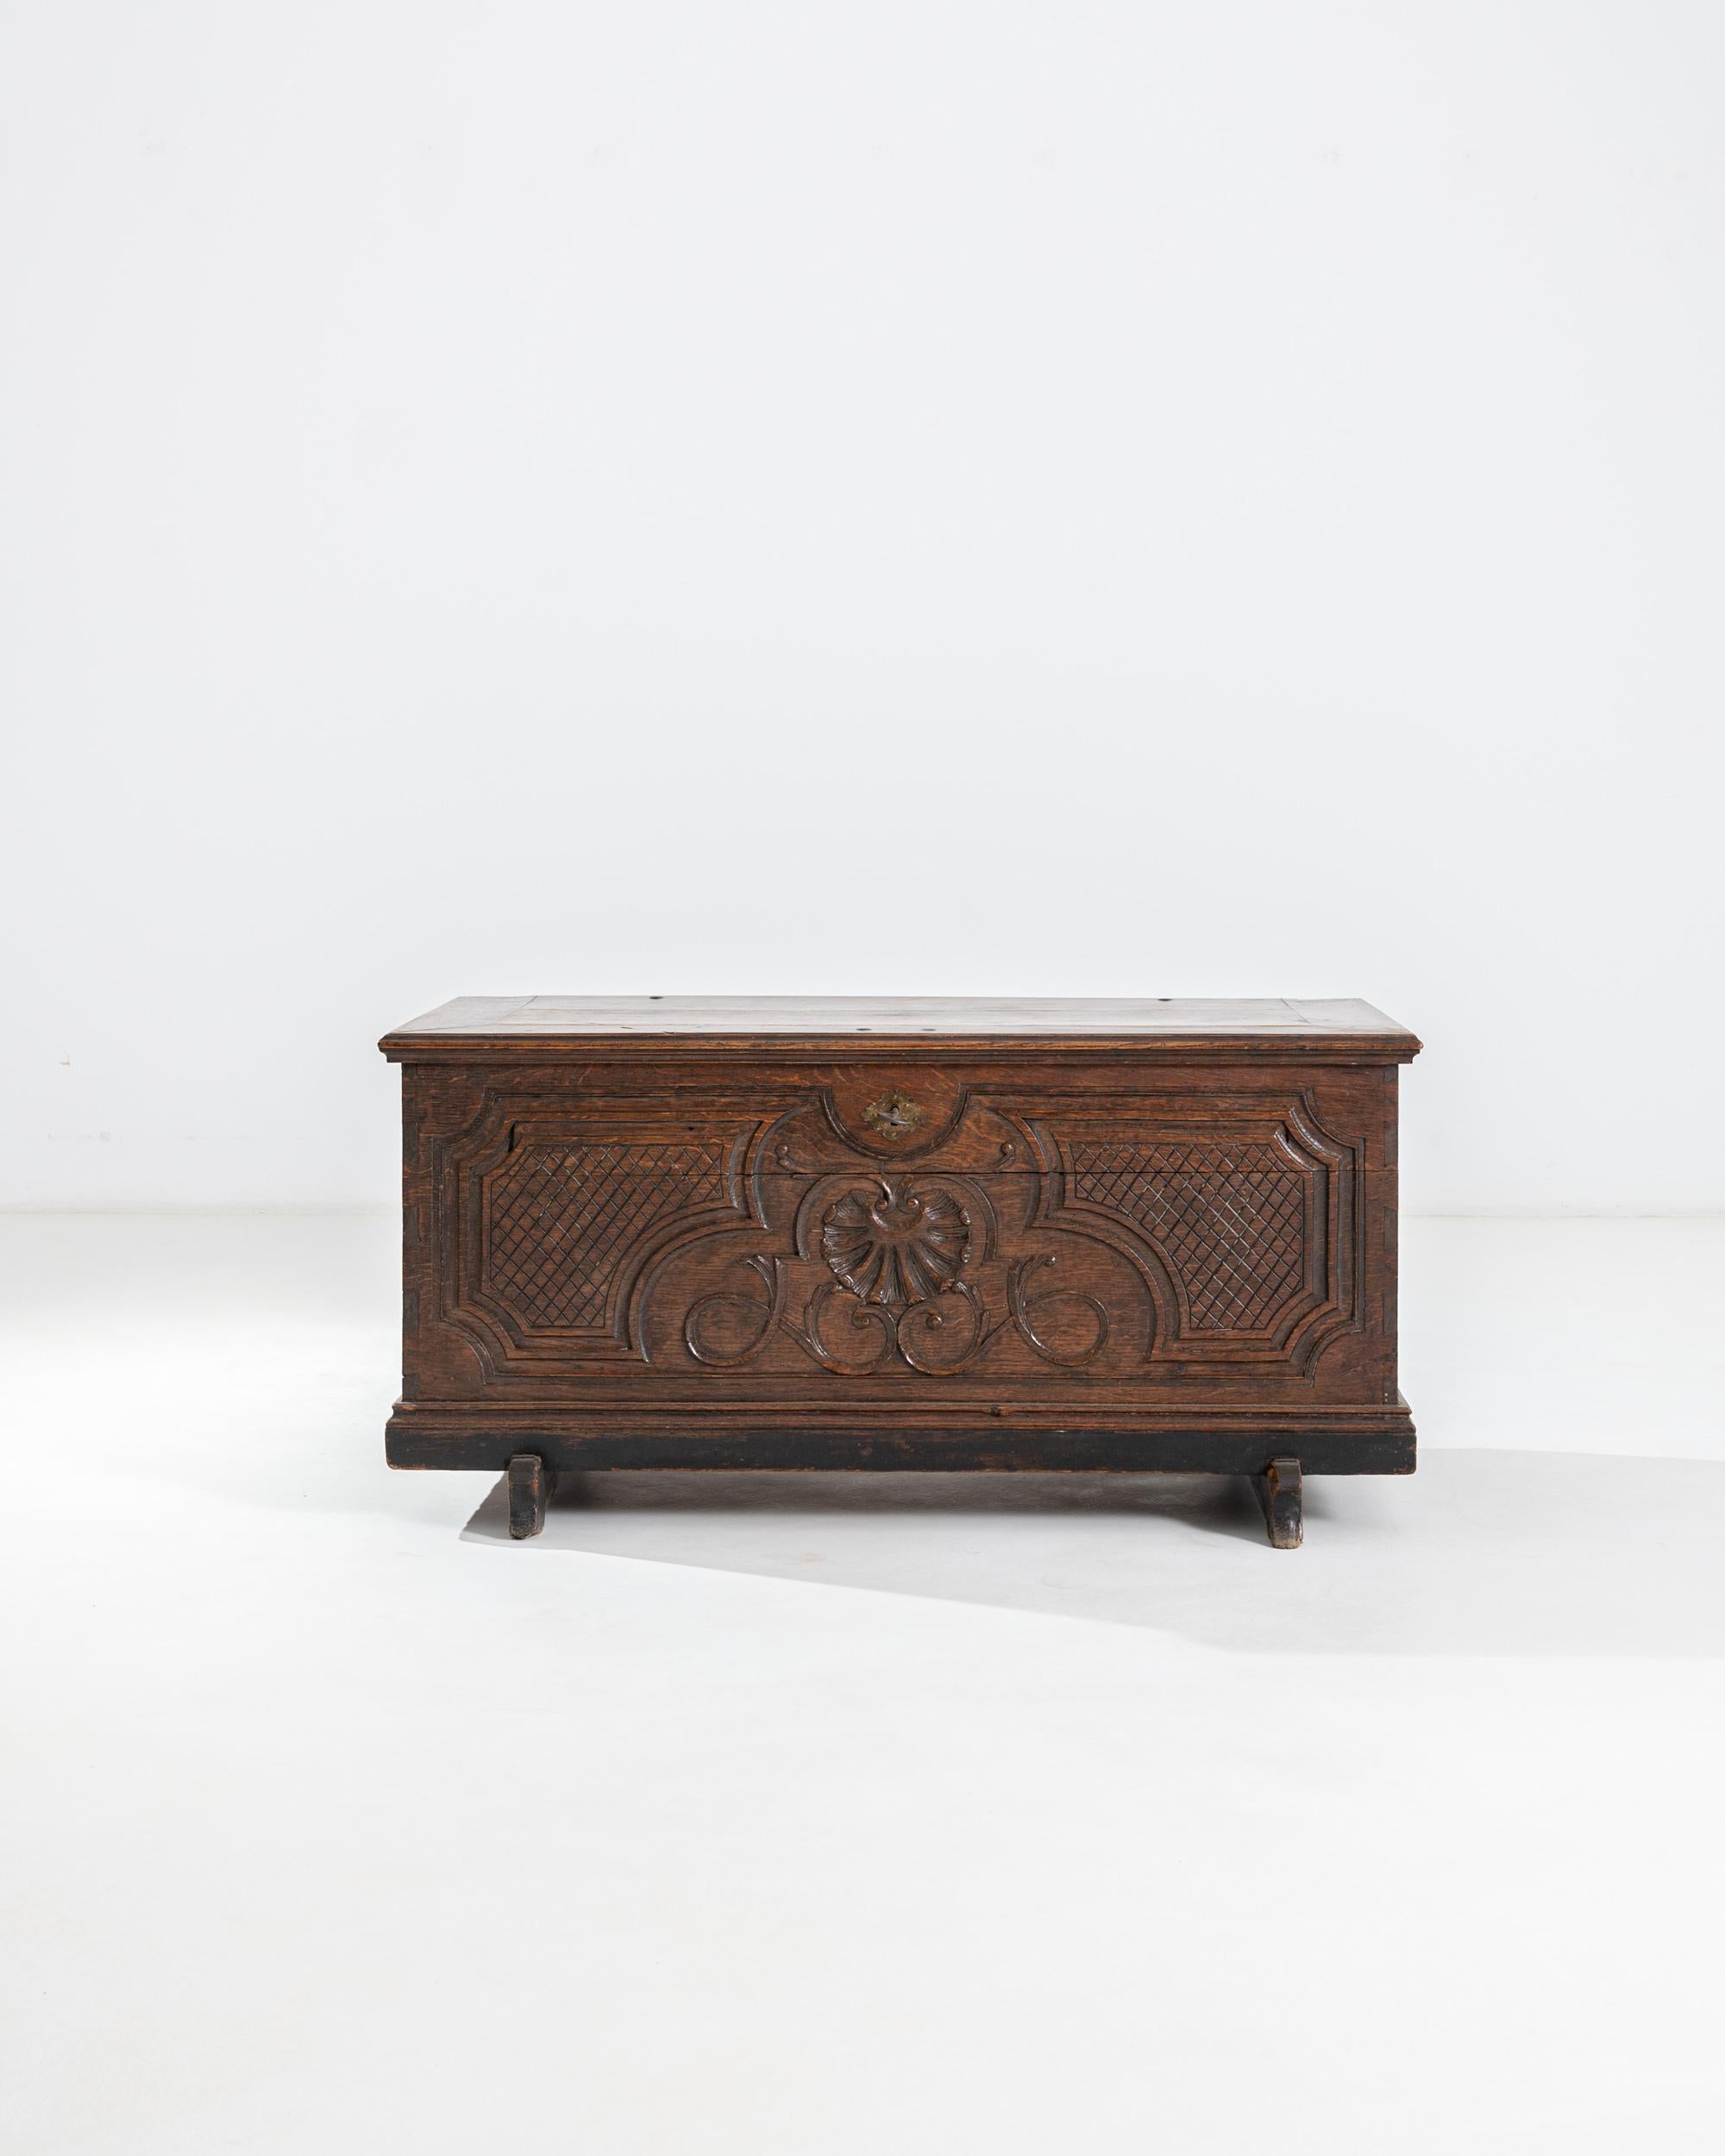 An early 19th century carved trunk produced in France, this large trunk on a stand is a sculpted delicacy. Sporting an adroitly carved front, the ornate case exhibits a natural lush patina of auburn tones with darker accents. A central shell and